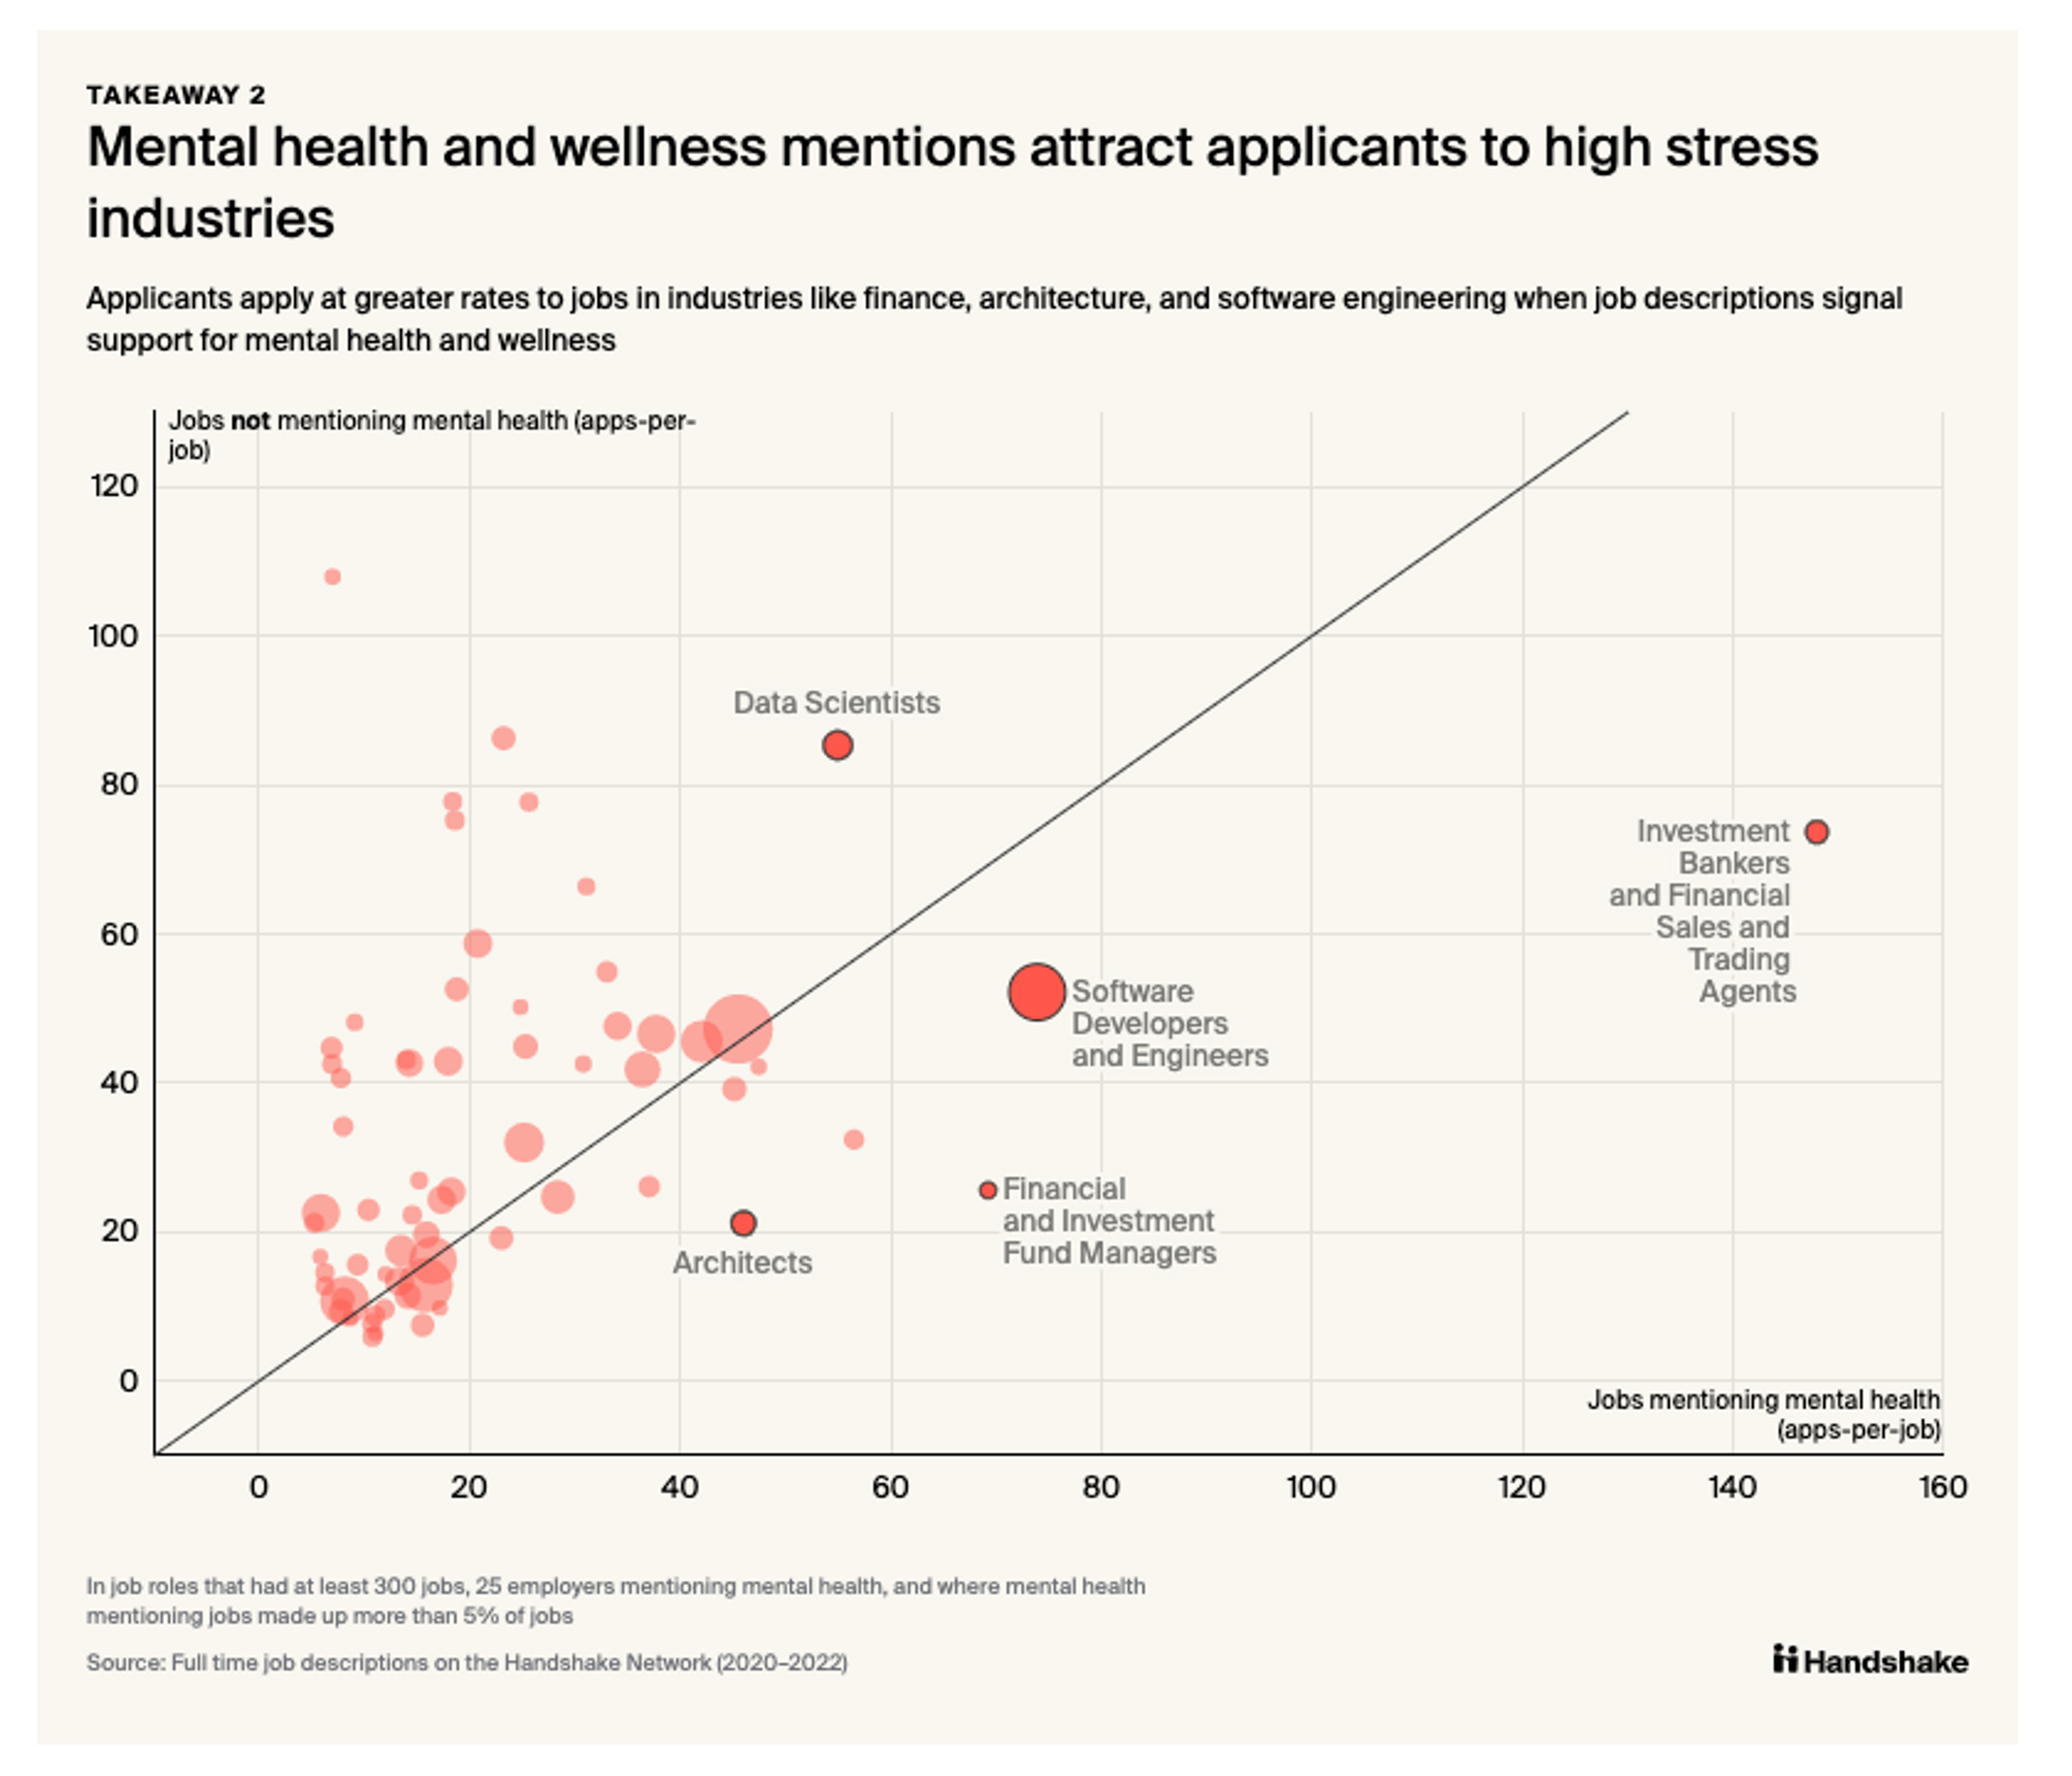 Chart showing mental health and wellness mentions in job descriptions attract applicants to high stress industries